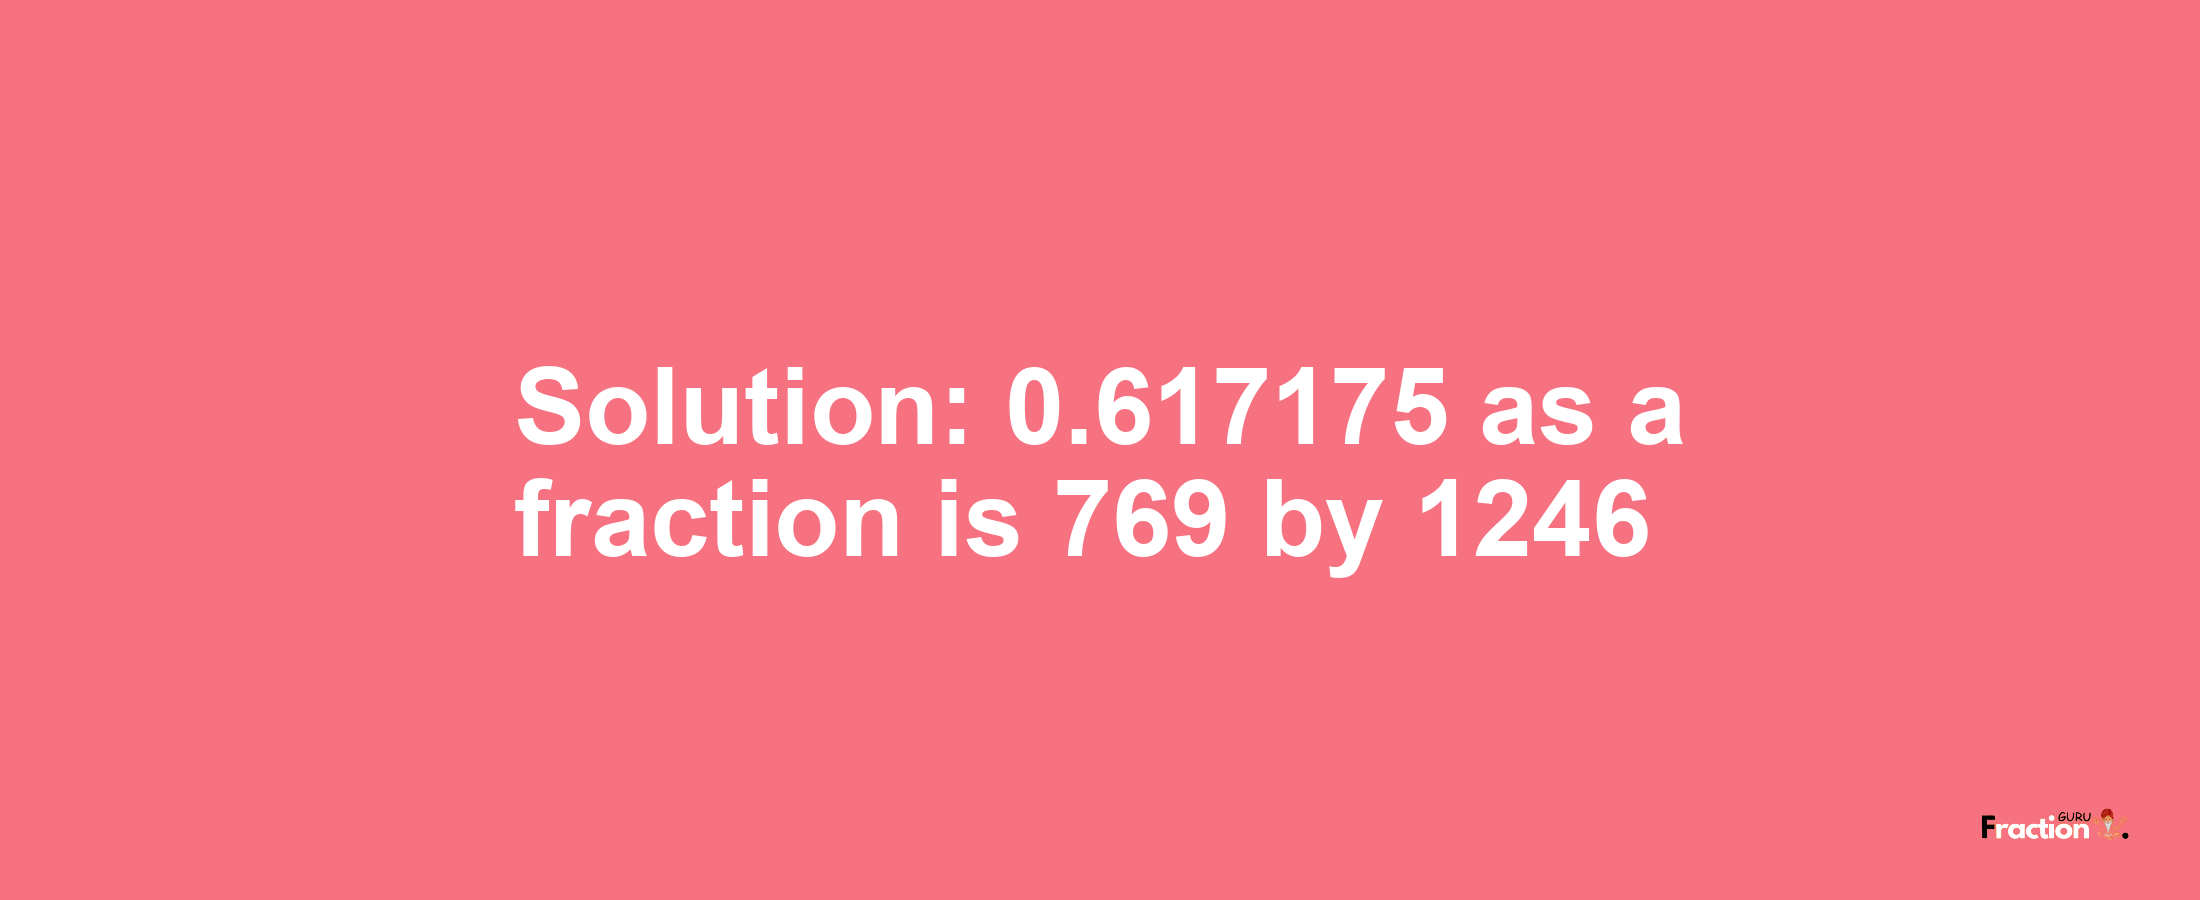 Solution:0.617175 as a fraction is 769/1246